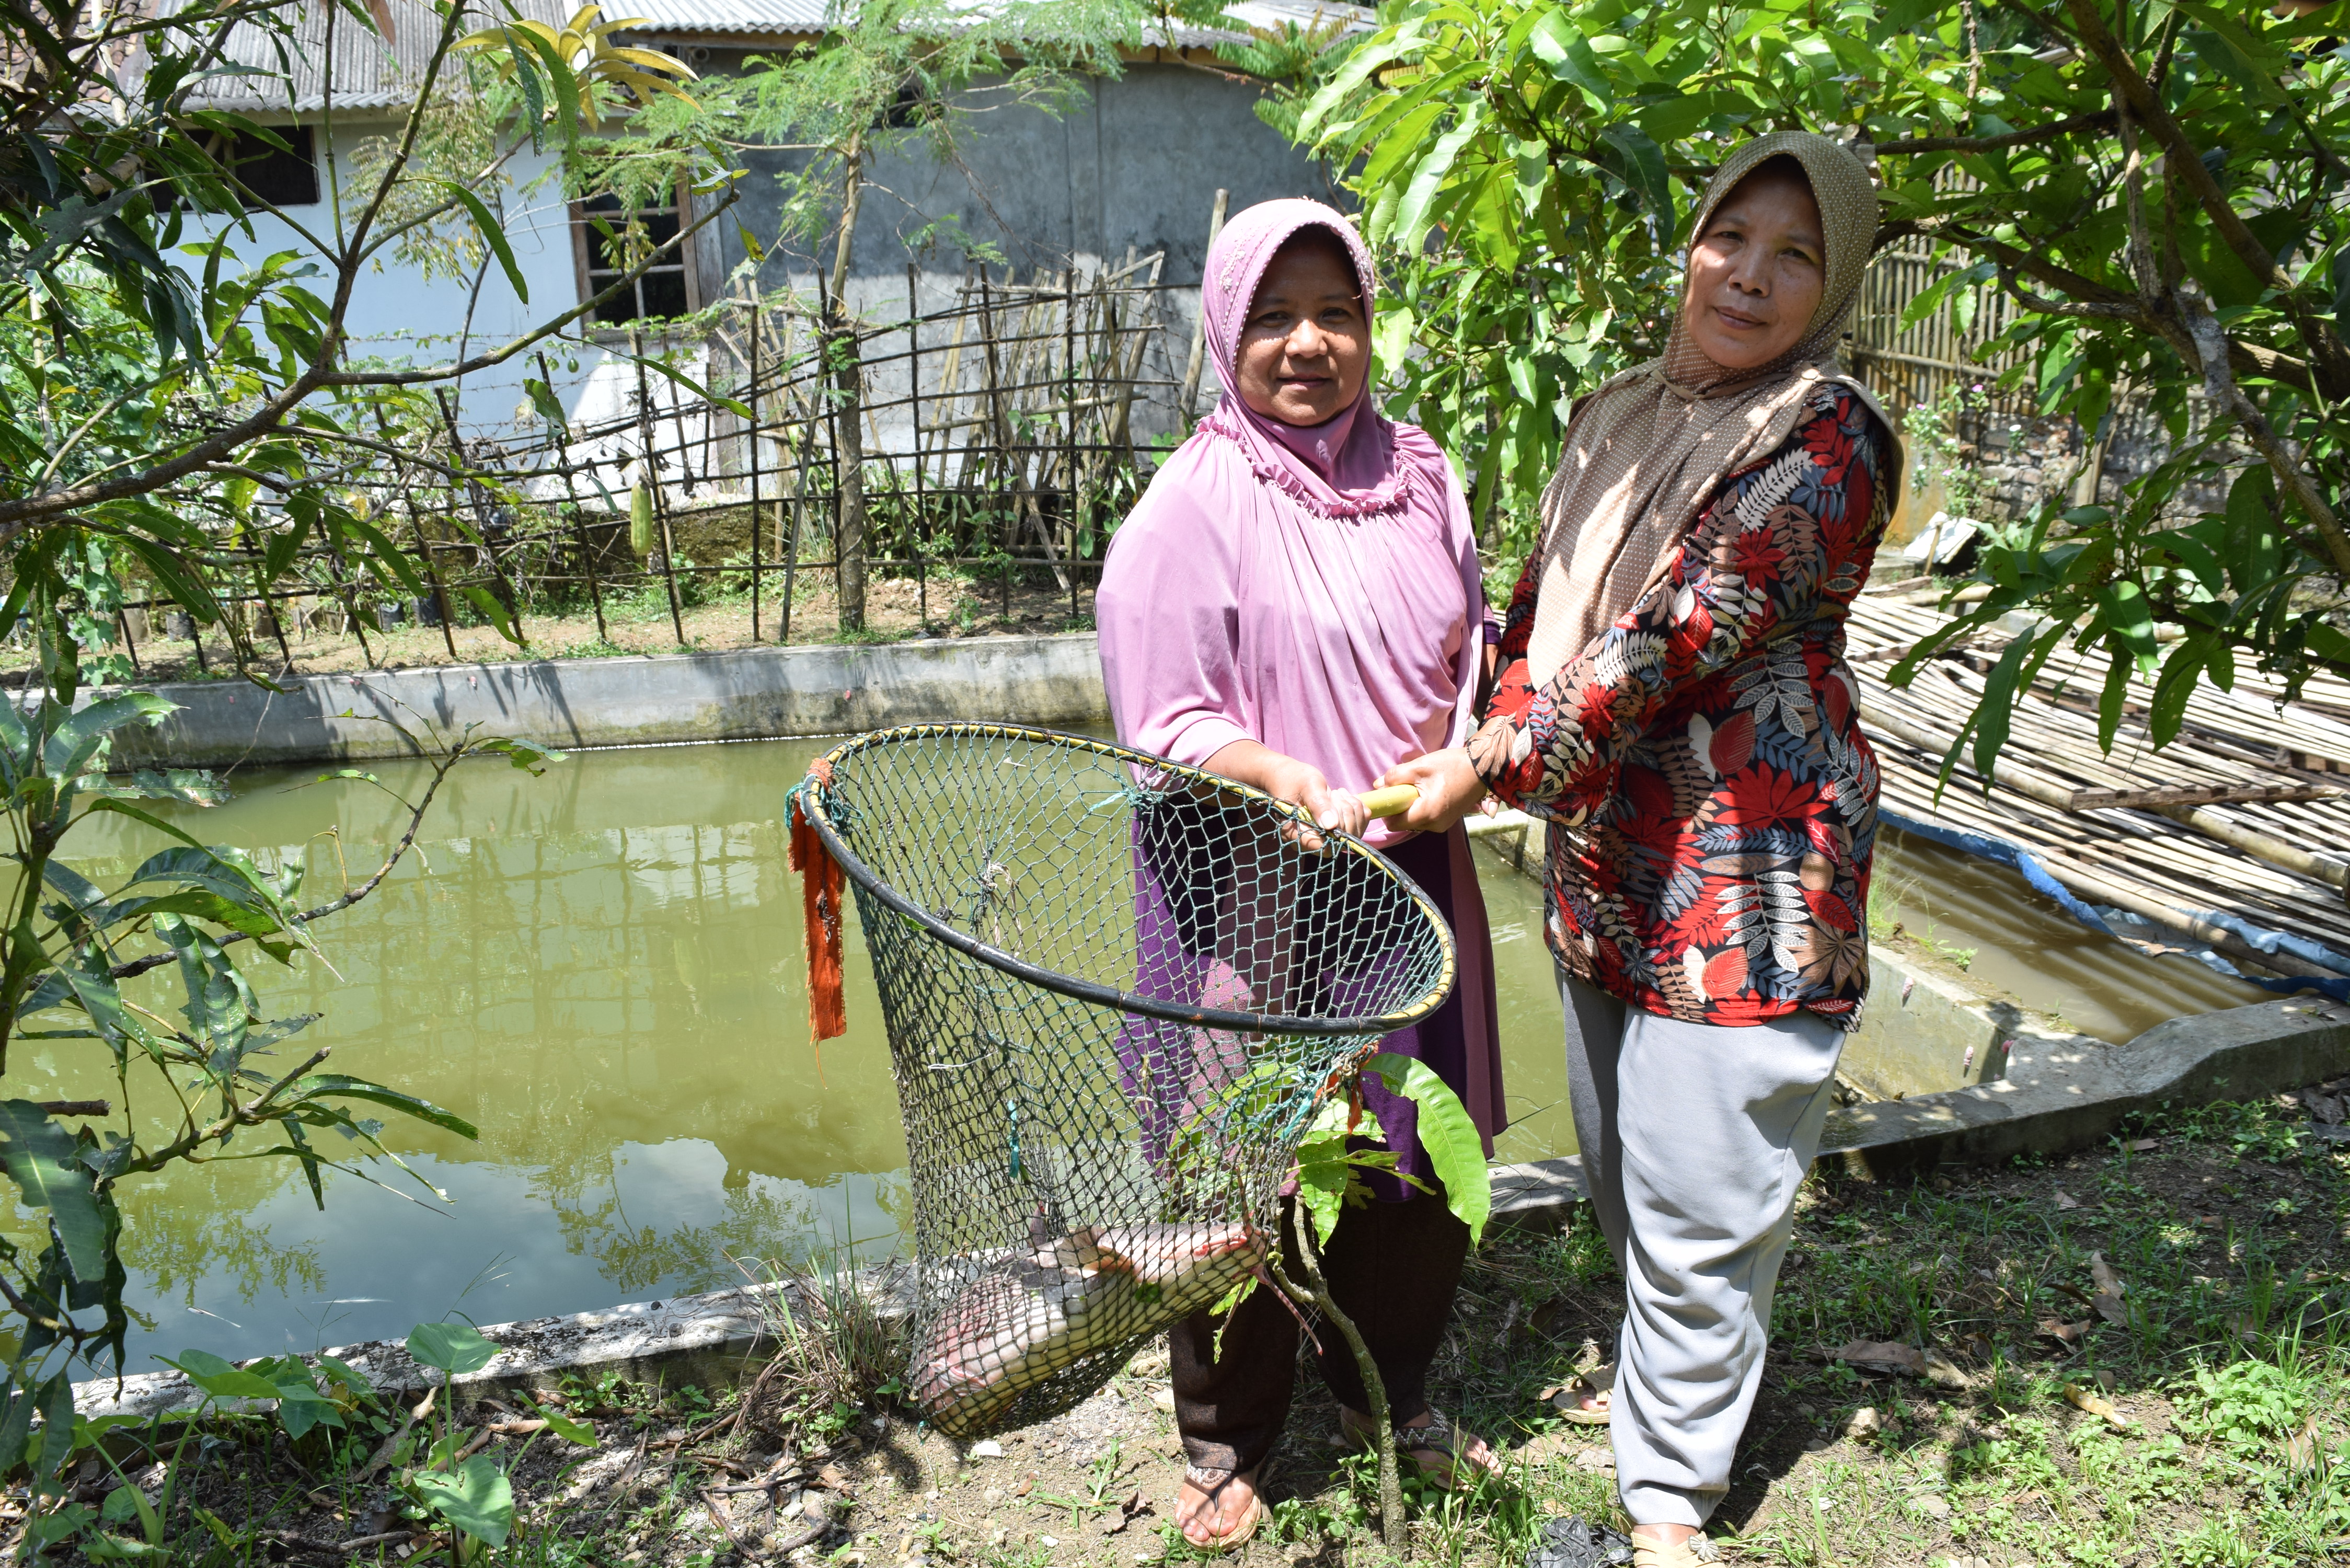 Indonesian former domestic helpers Enok Salamah (left) and Aan (right) hold a catfish in a net at a fish farm in Caringin village on Indonesia’s Java island on April 10, 2017. The catfish farm is an initiative to help victims of trafficking to reintegrate into society. Thomson Reuters Foundation/Beh Lih Yi